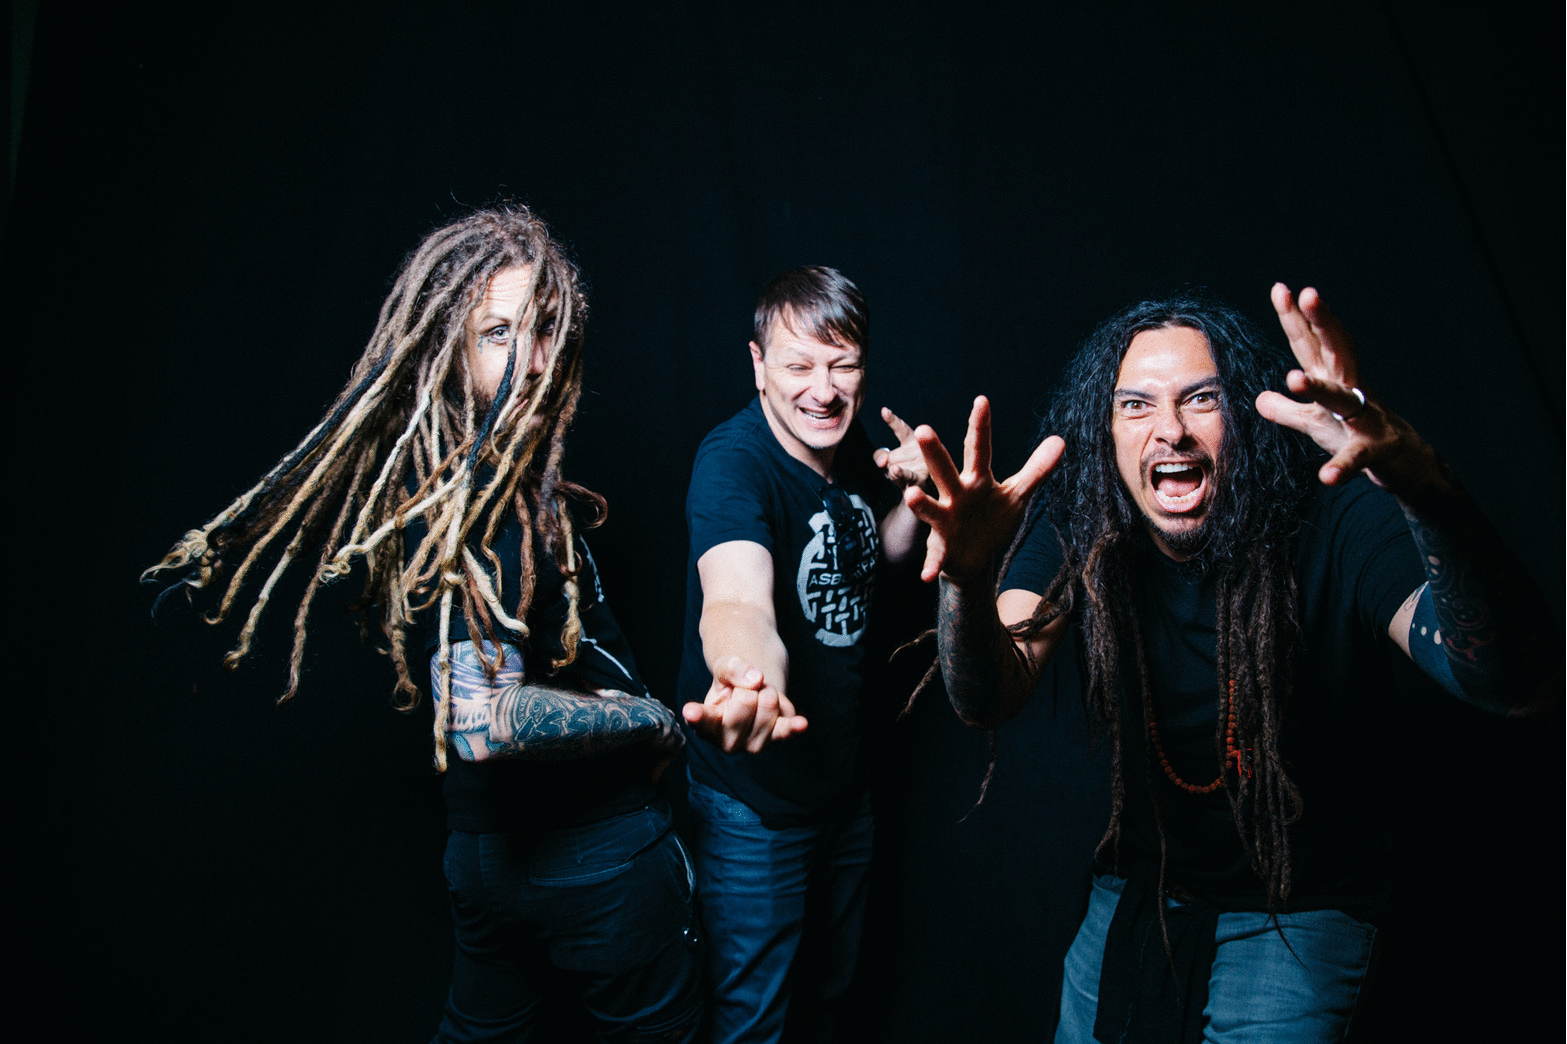 INTERVIEW Korn On New Album 'The Serenity of Suffering'